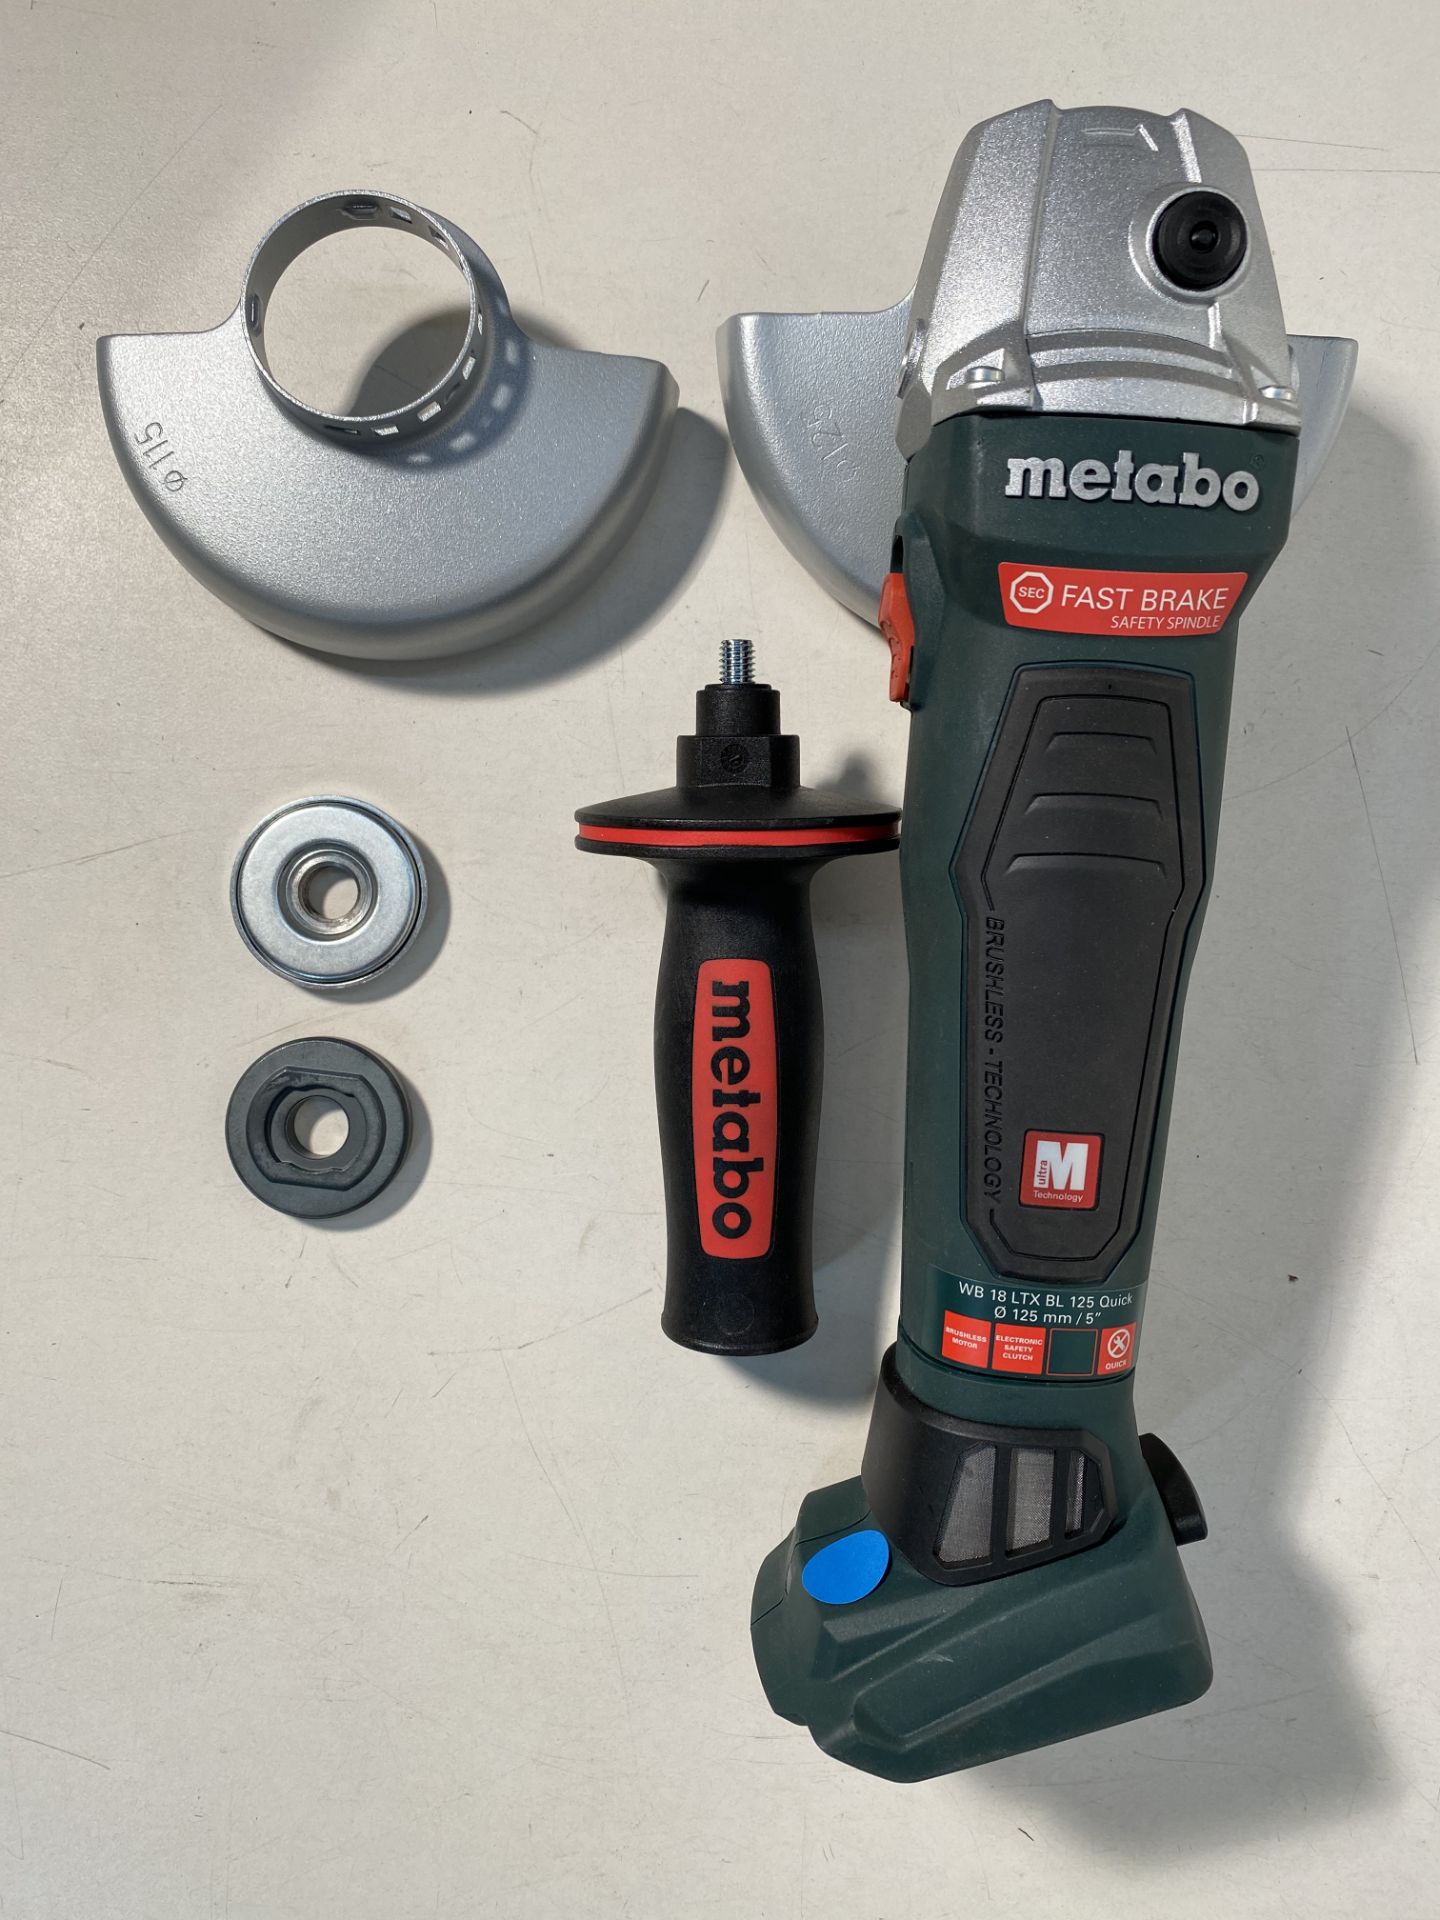 Metabo WB18LTXBL125 18v Quick 5in Brushless Angle Grinder Bare Unit and MetaLoc